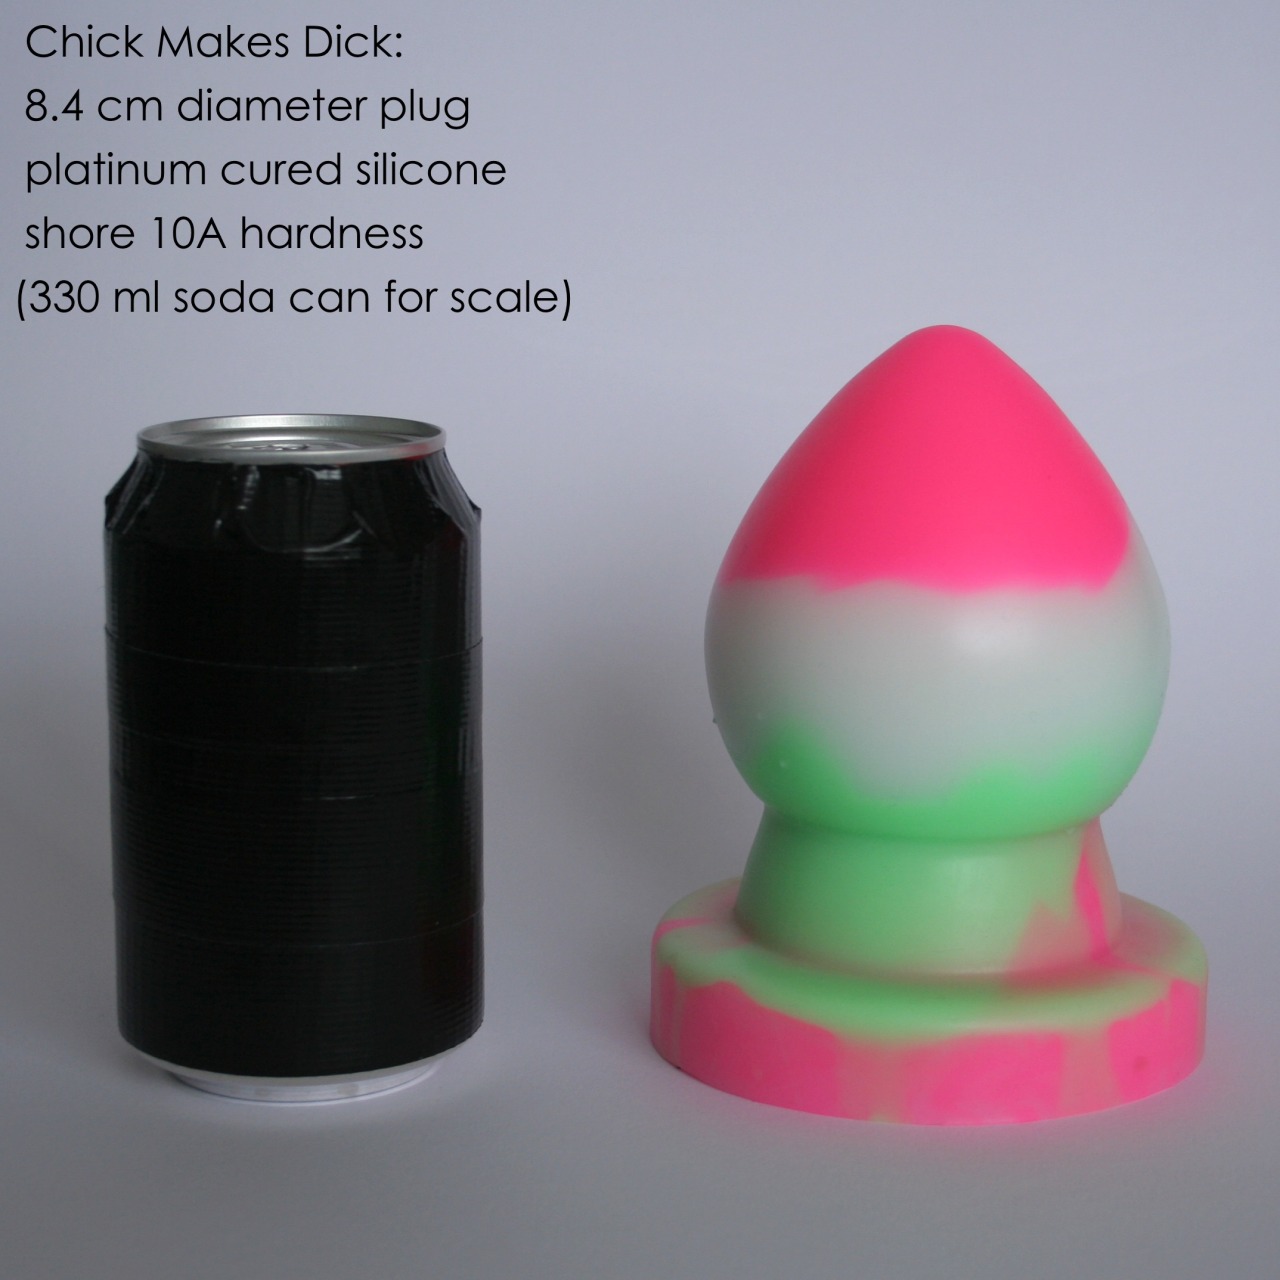 chickmakesdick:https://www.etsy.com/uk/listing/478291250/adult-toy-fat-silicone-plug-84-cm?ref=ss_listing